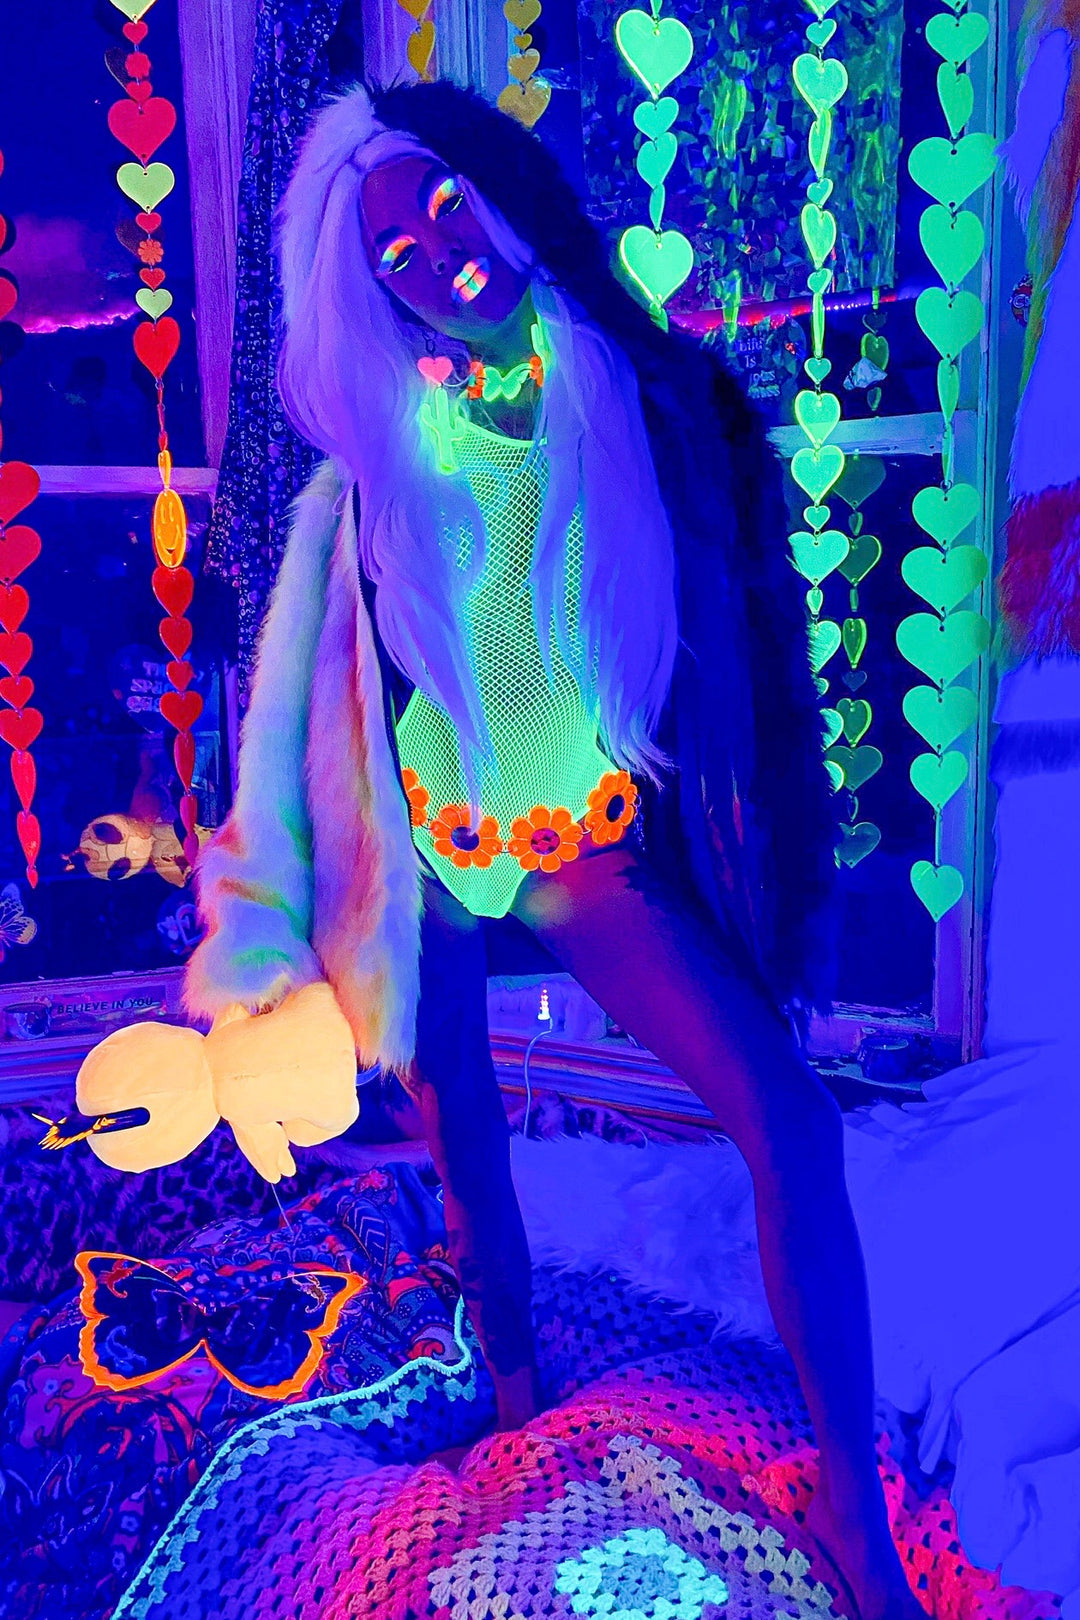 Area 51 alt text: Area 51 Alien face coat black and neon rainbow faux fur by Space island. Spvce Island is a wearable art collective featuring festival fashion, rave wear, club wear and streetwear. Buy coats, jackets, platform boots, gogo boots, rainbow platform sneakers, holographic sandals, shoes, burning man goggles, crystal chokers, holographic corsets, joggers, rave bottoms, bikinis, harnesses, bondage and more. 